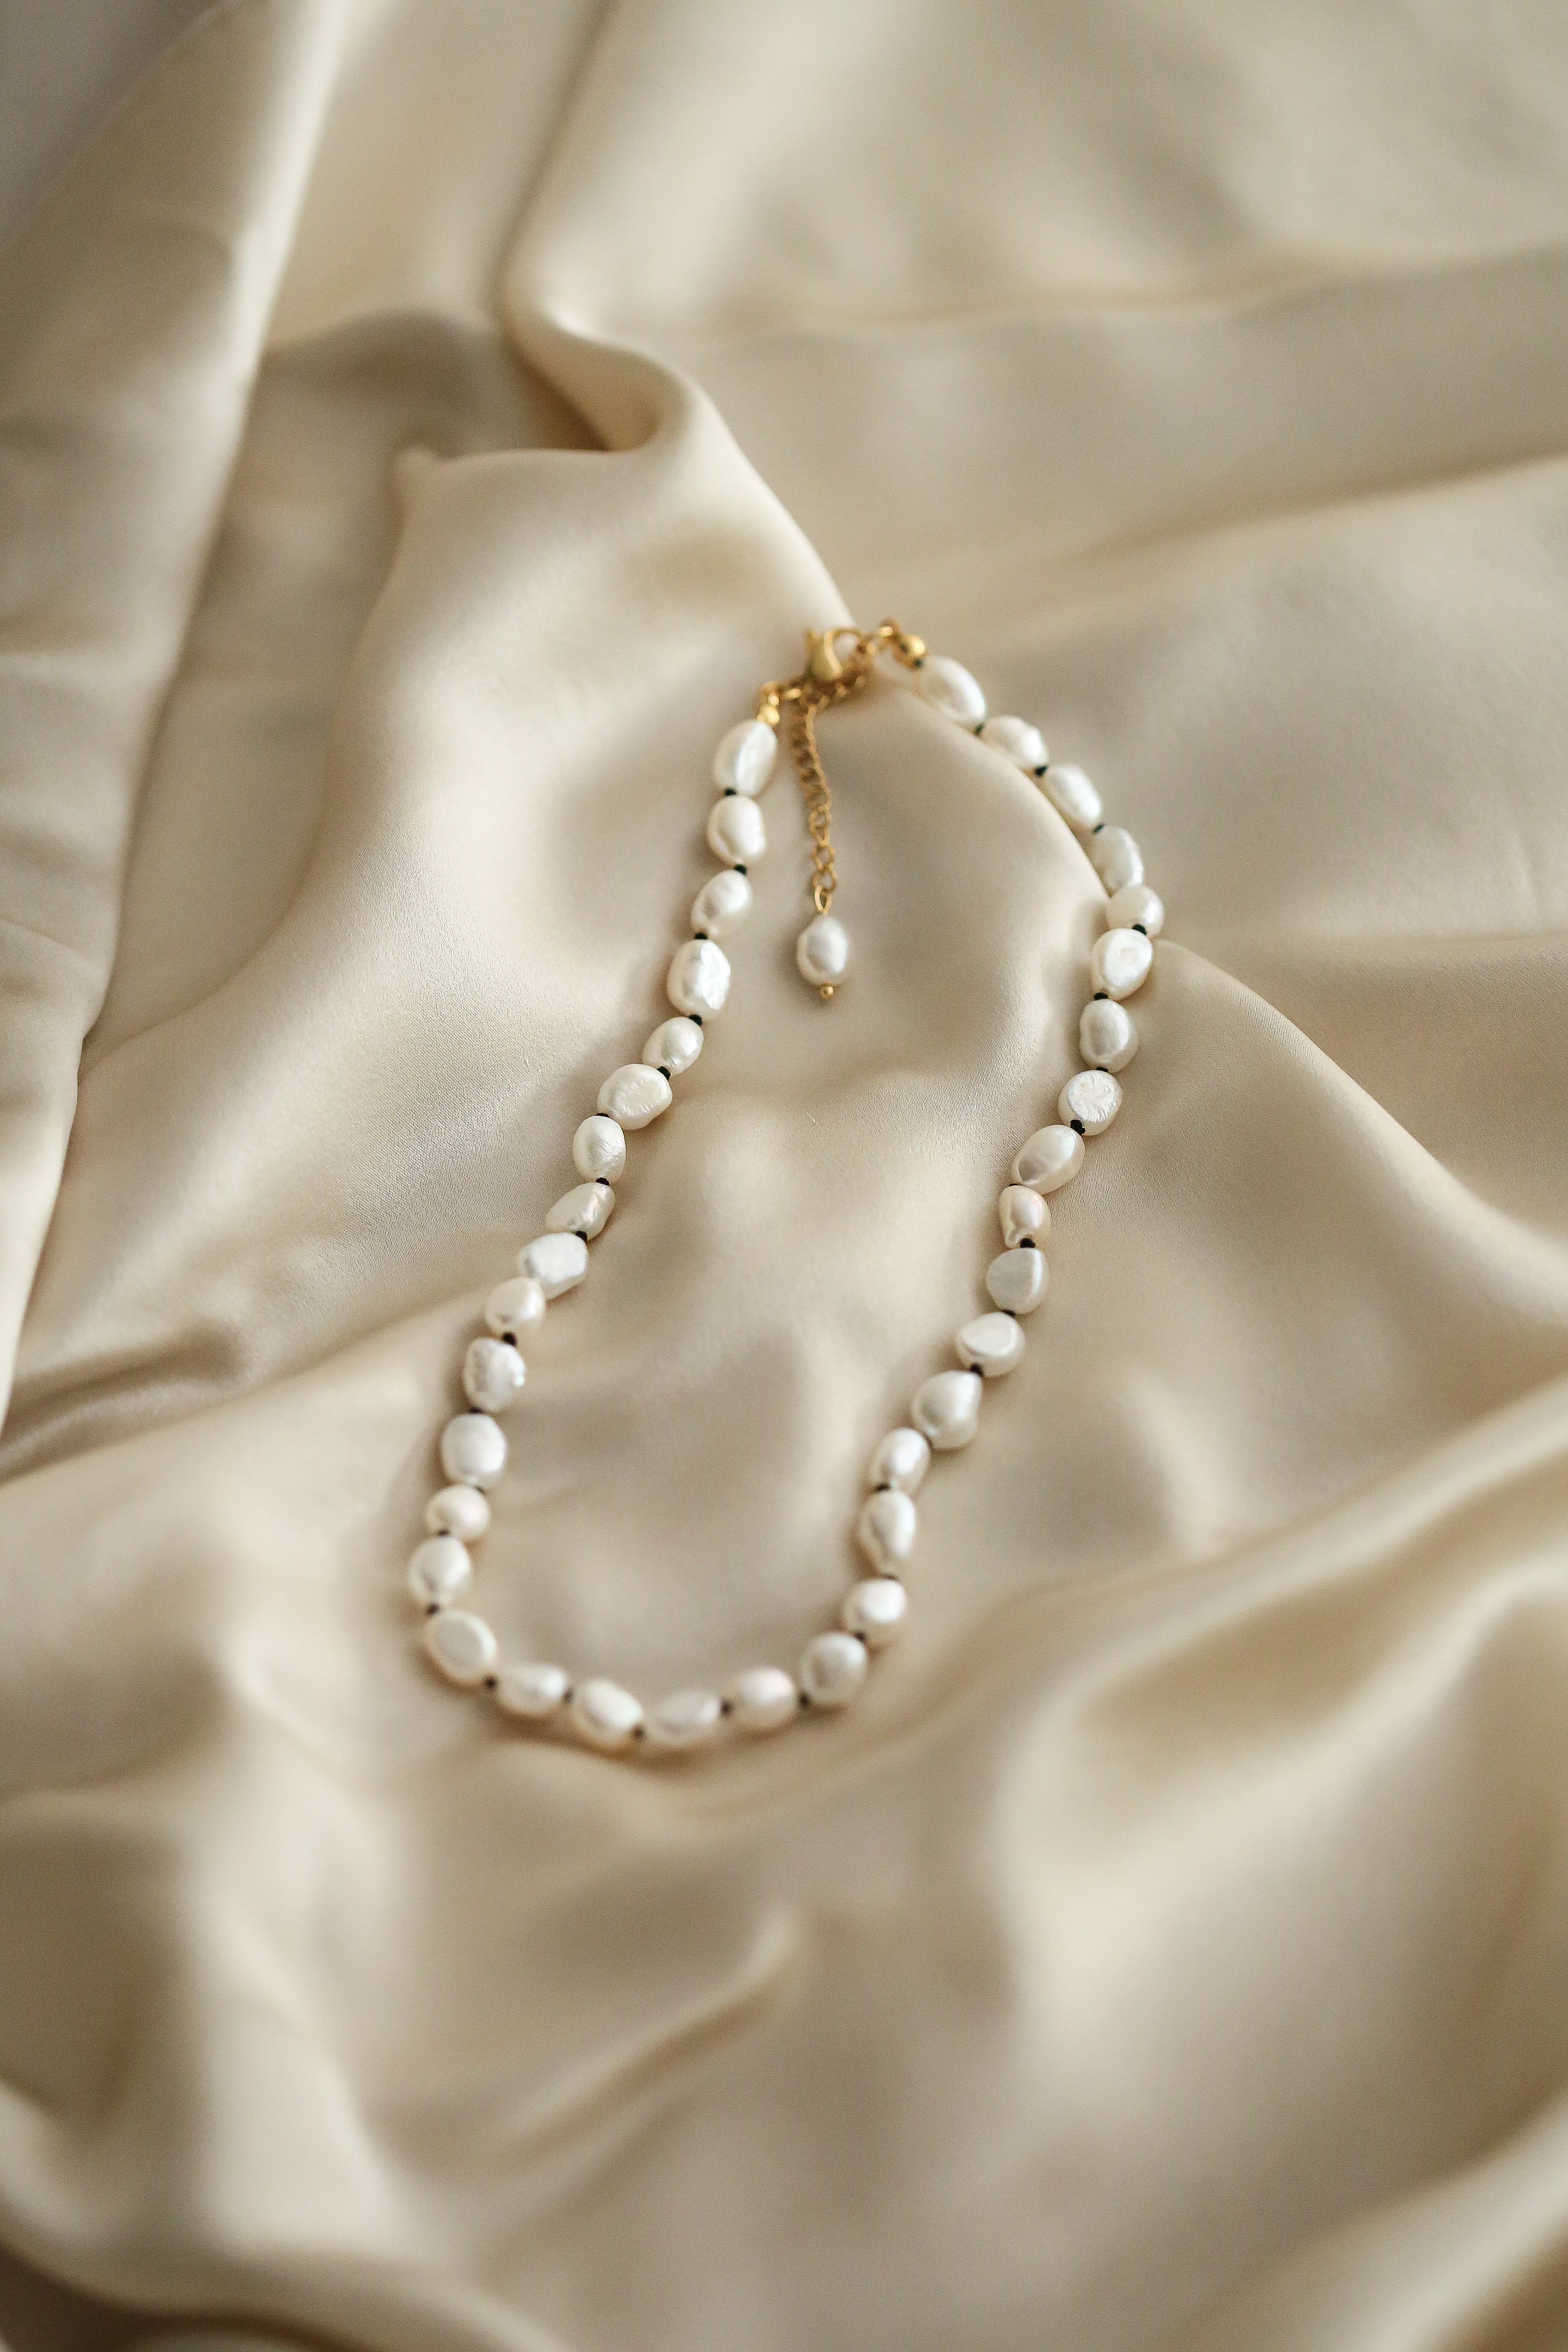 Ora Necklace - Boutique Minimaliste has waterproof, durable, elegant and vintage inspired jewelry